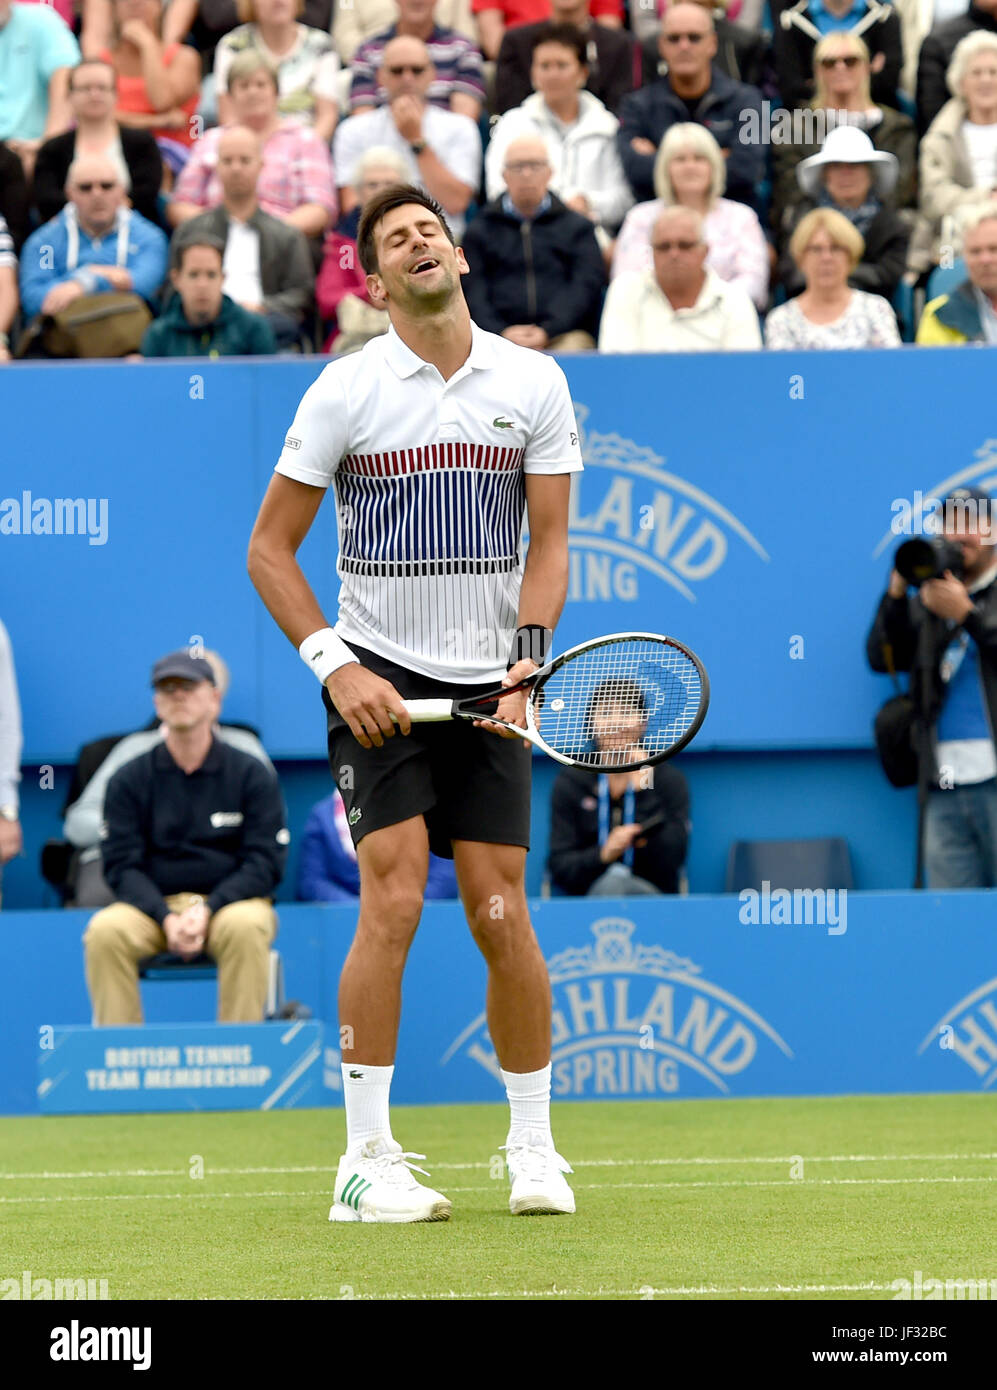 Novak Djokovic of Serbia in action at the Aegon International Eastbourne tennis tournament at Devonshire Park , Eastbourne Sussex UK . 28 Jun 2017 Photograph taken by Simon Dack Stock Photo